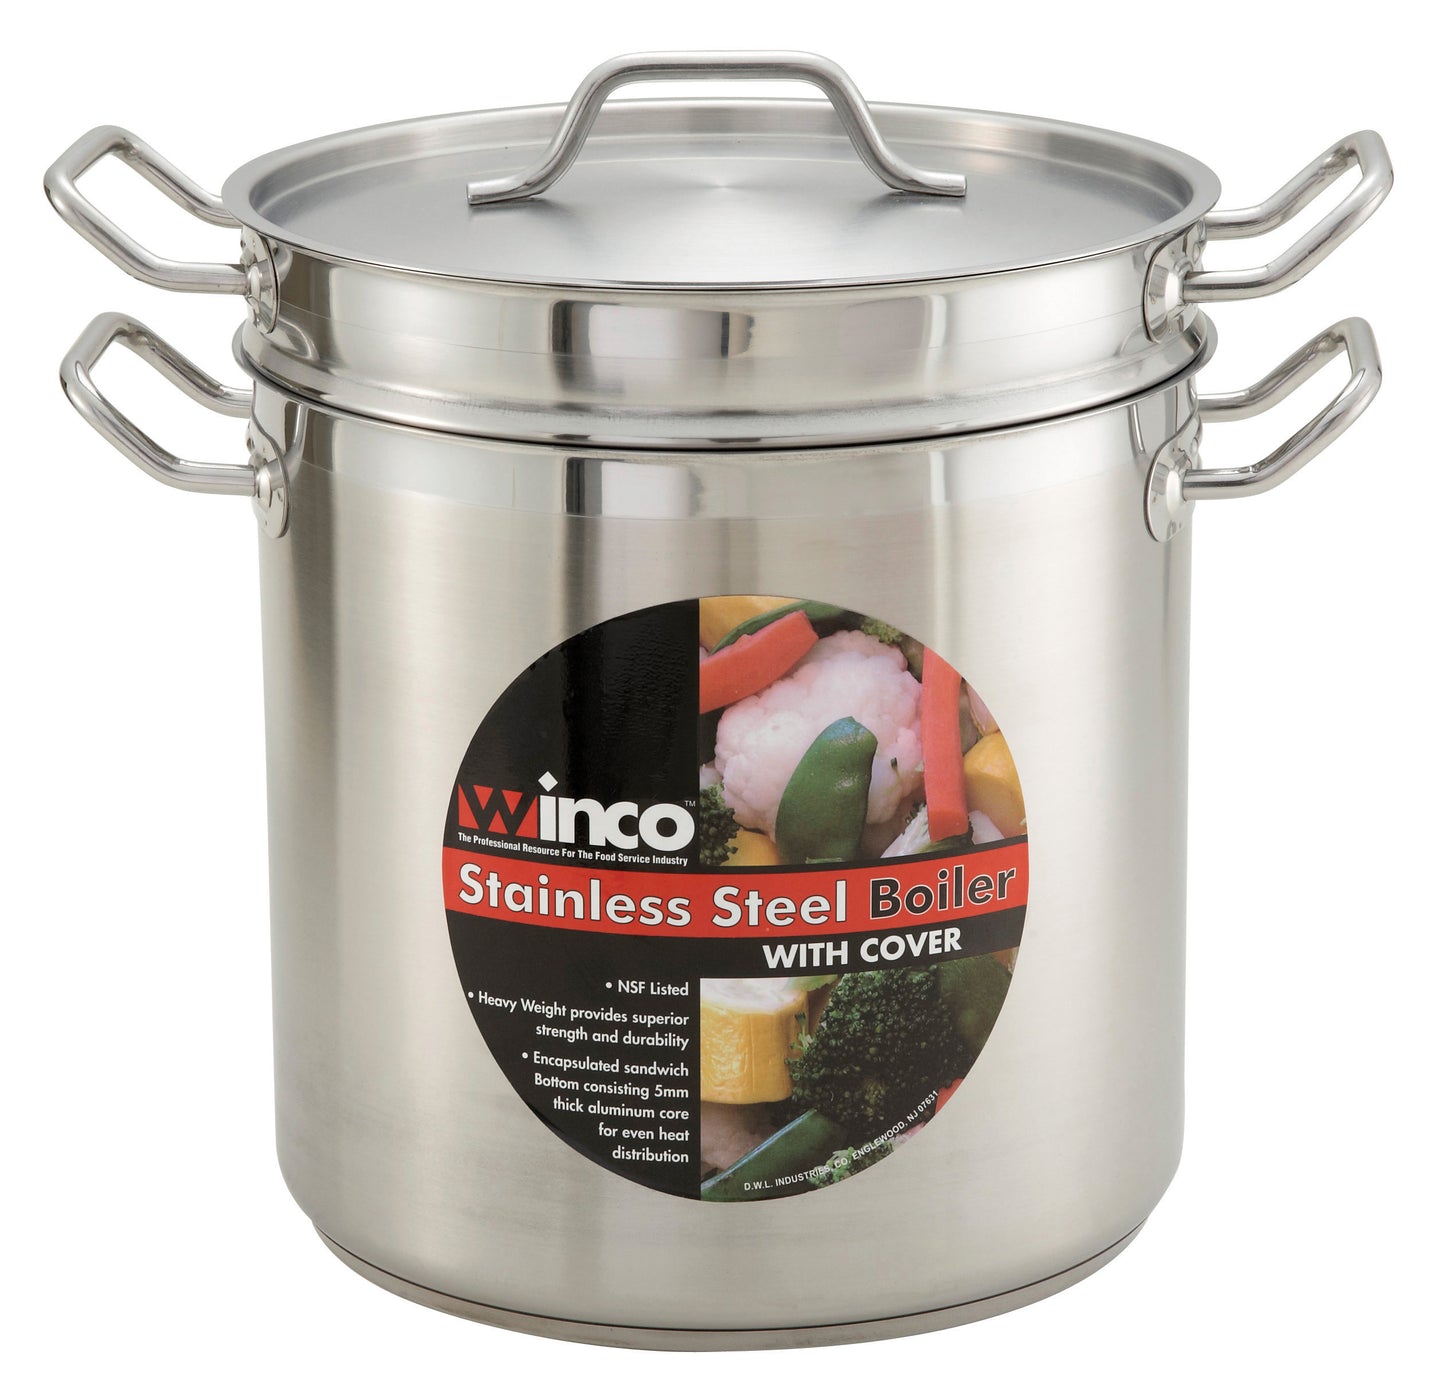 Stainless Steel Double Boiler with Cover - 16 Quart